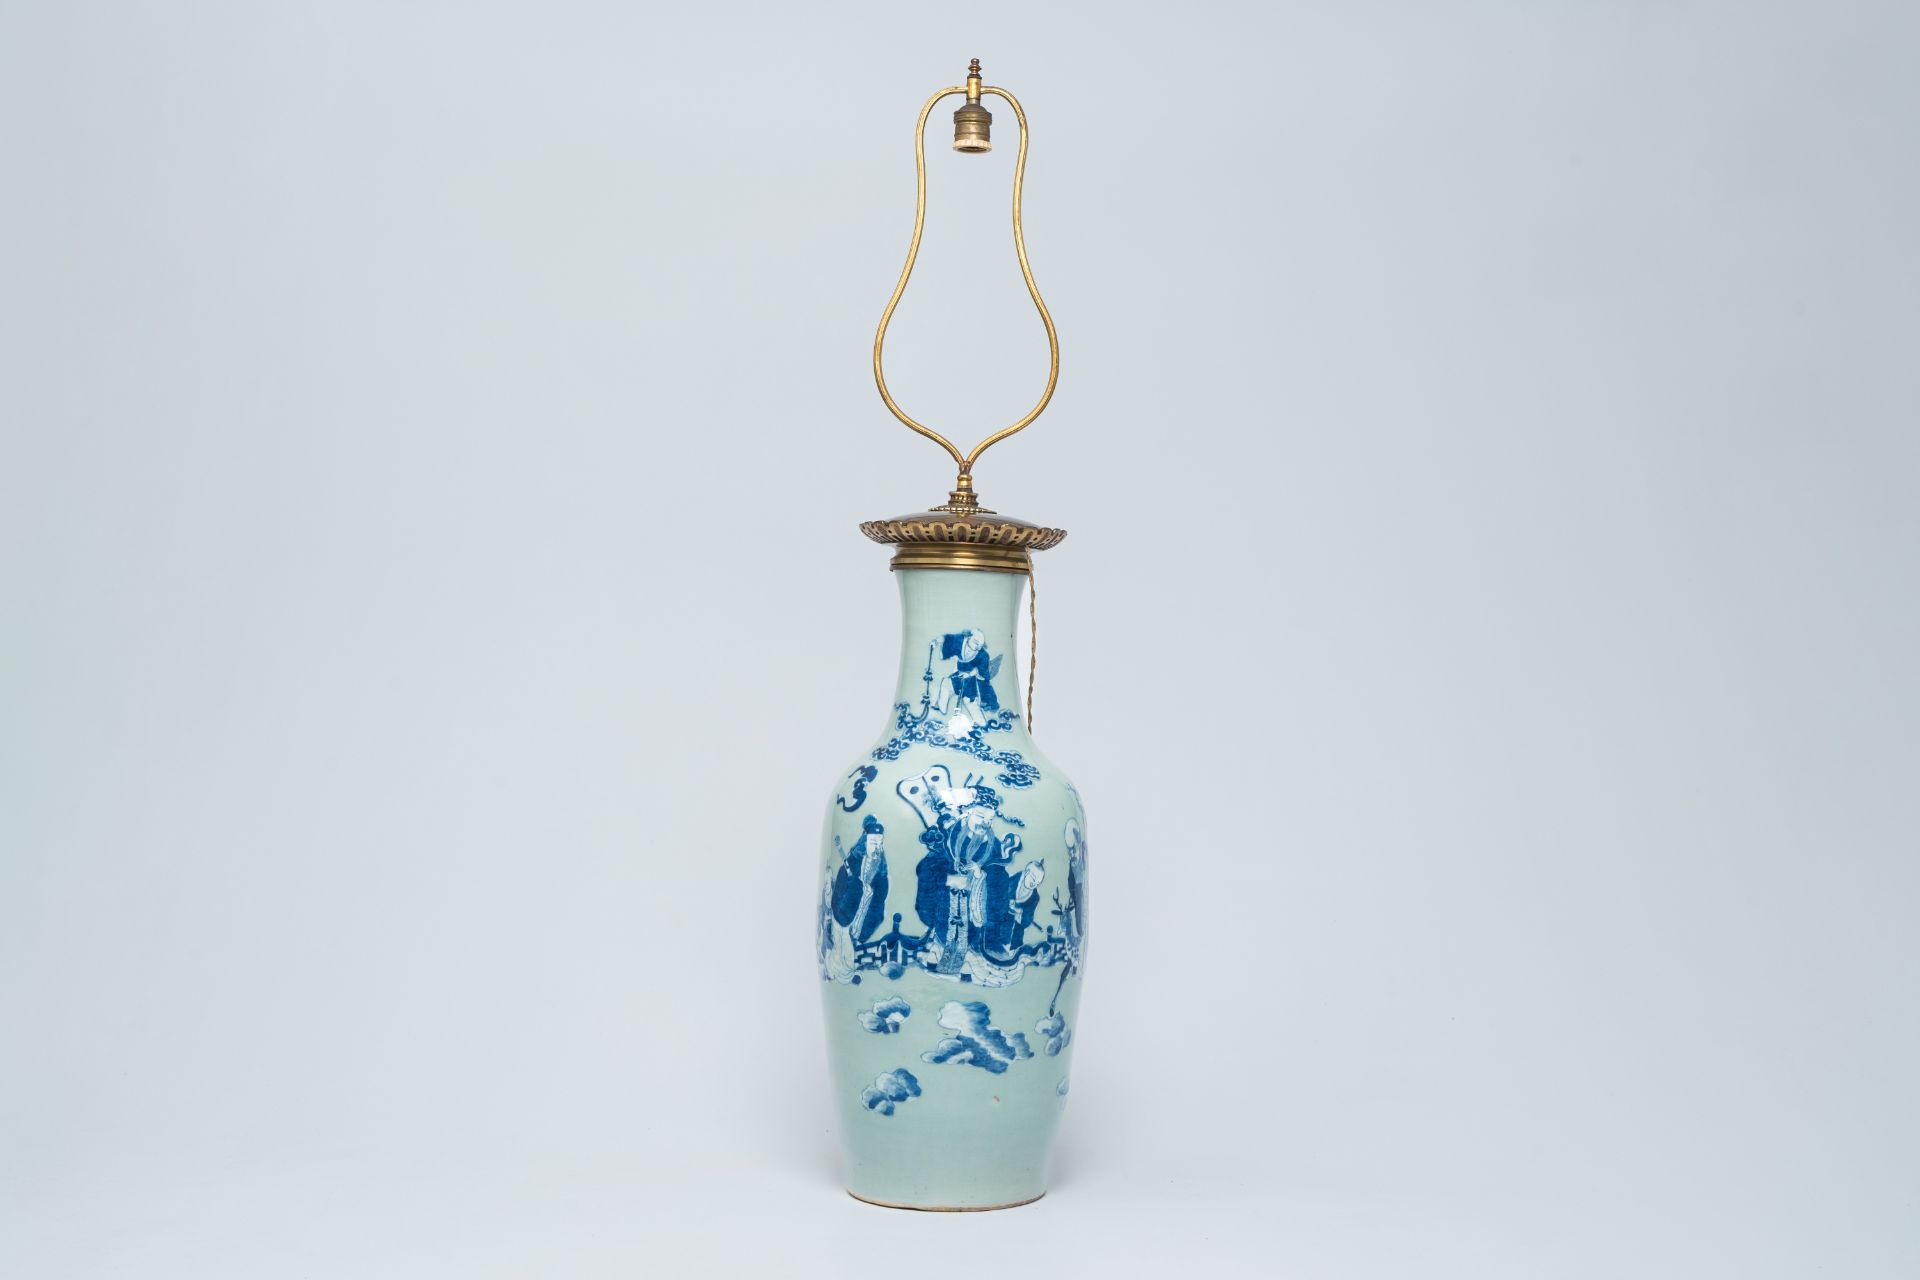 A Chinese blue and white celadon ground vase with the 'Star God' figures and their servants mounted